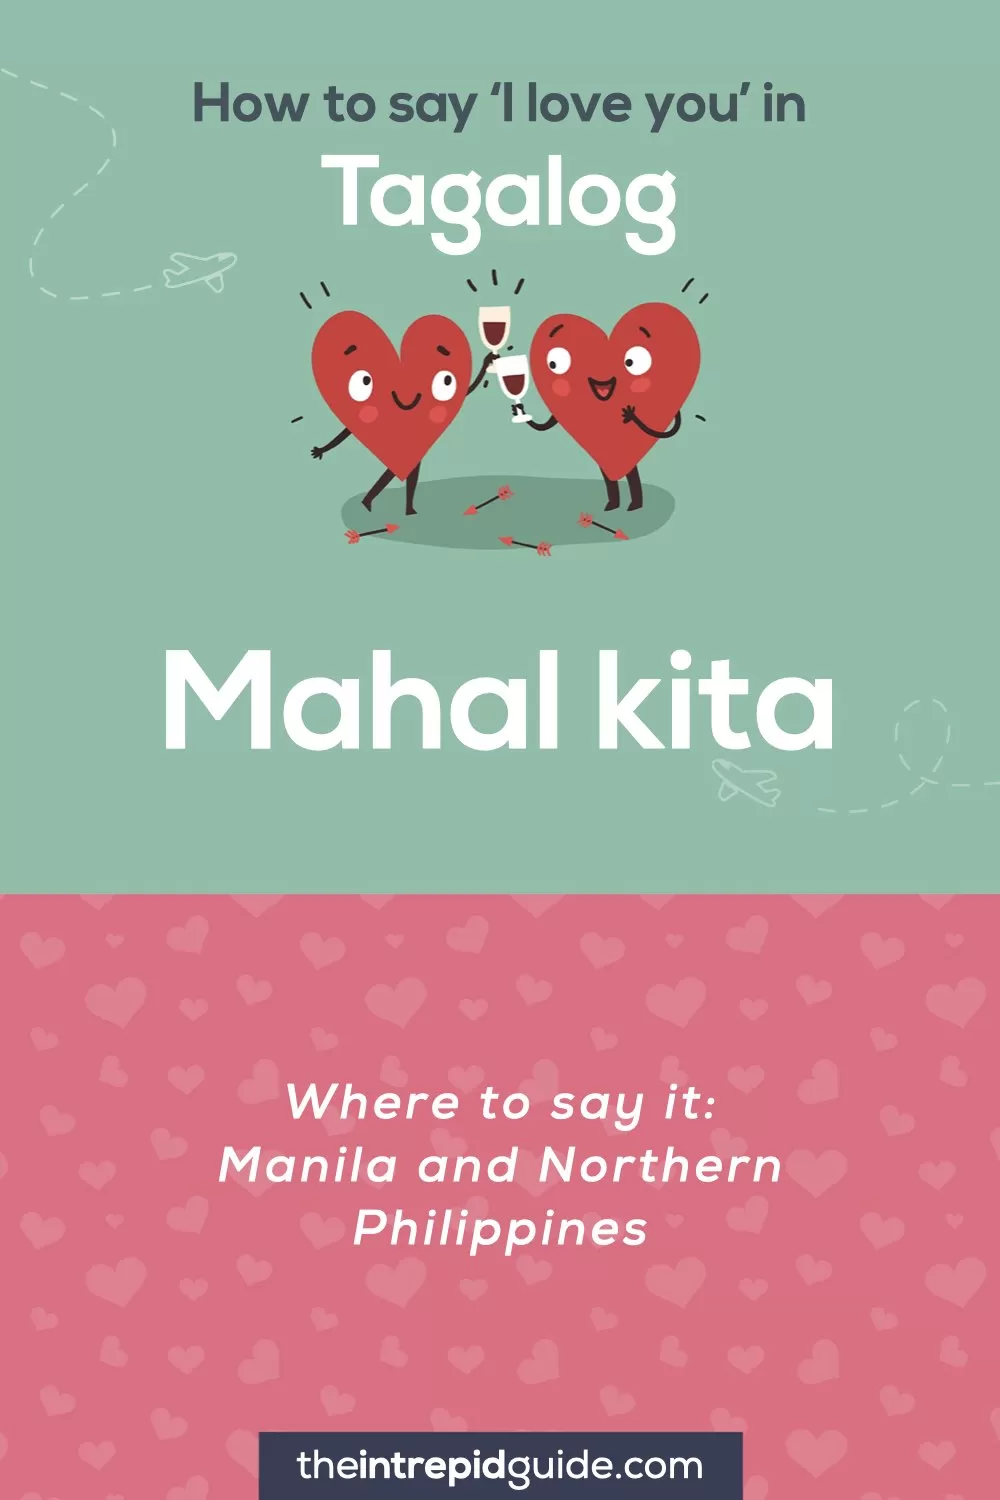 How to say I love you in different languages - Tagalog - Mahal kita